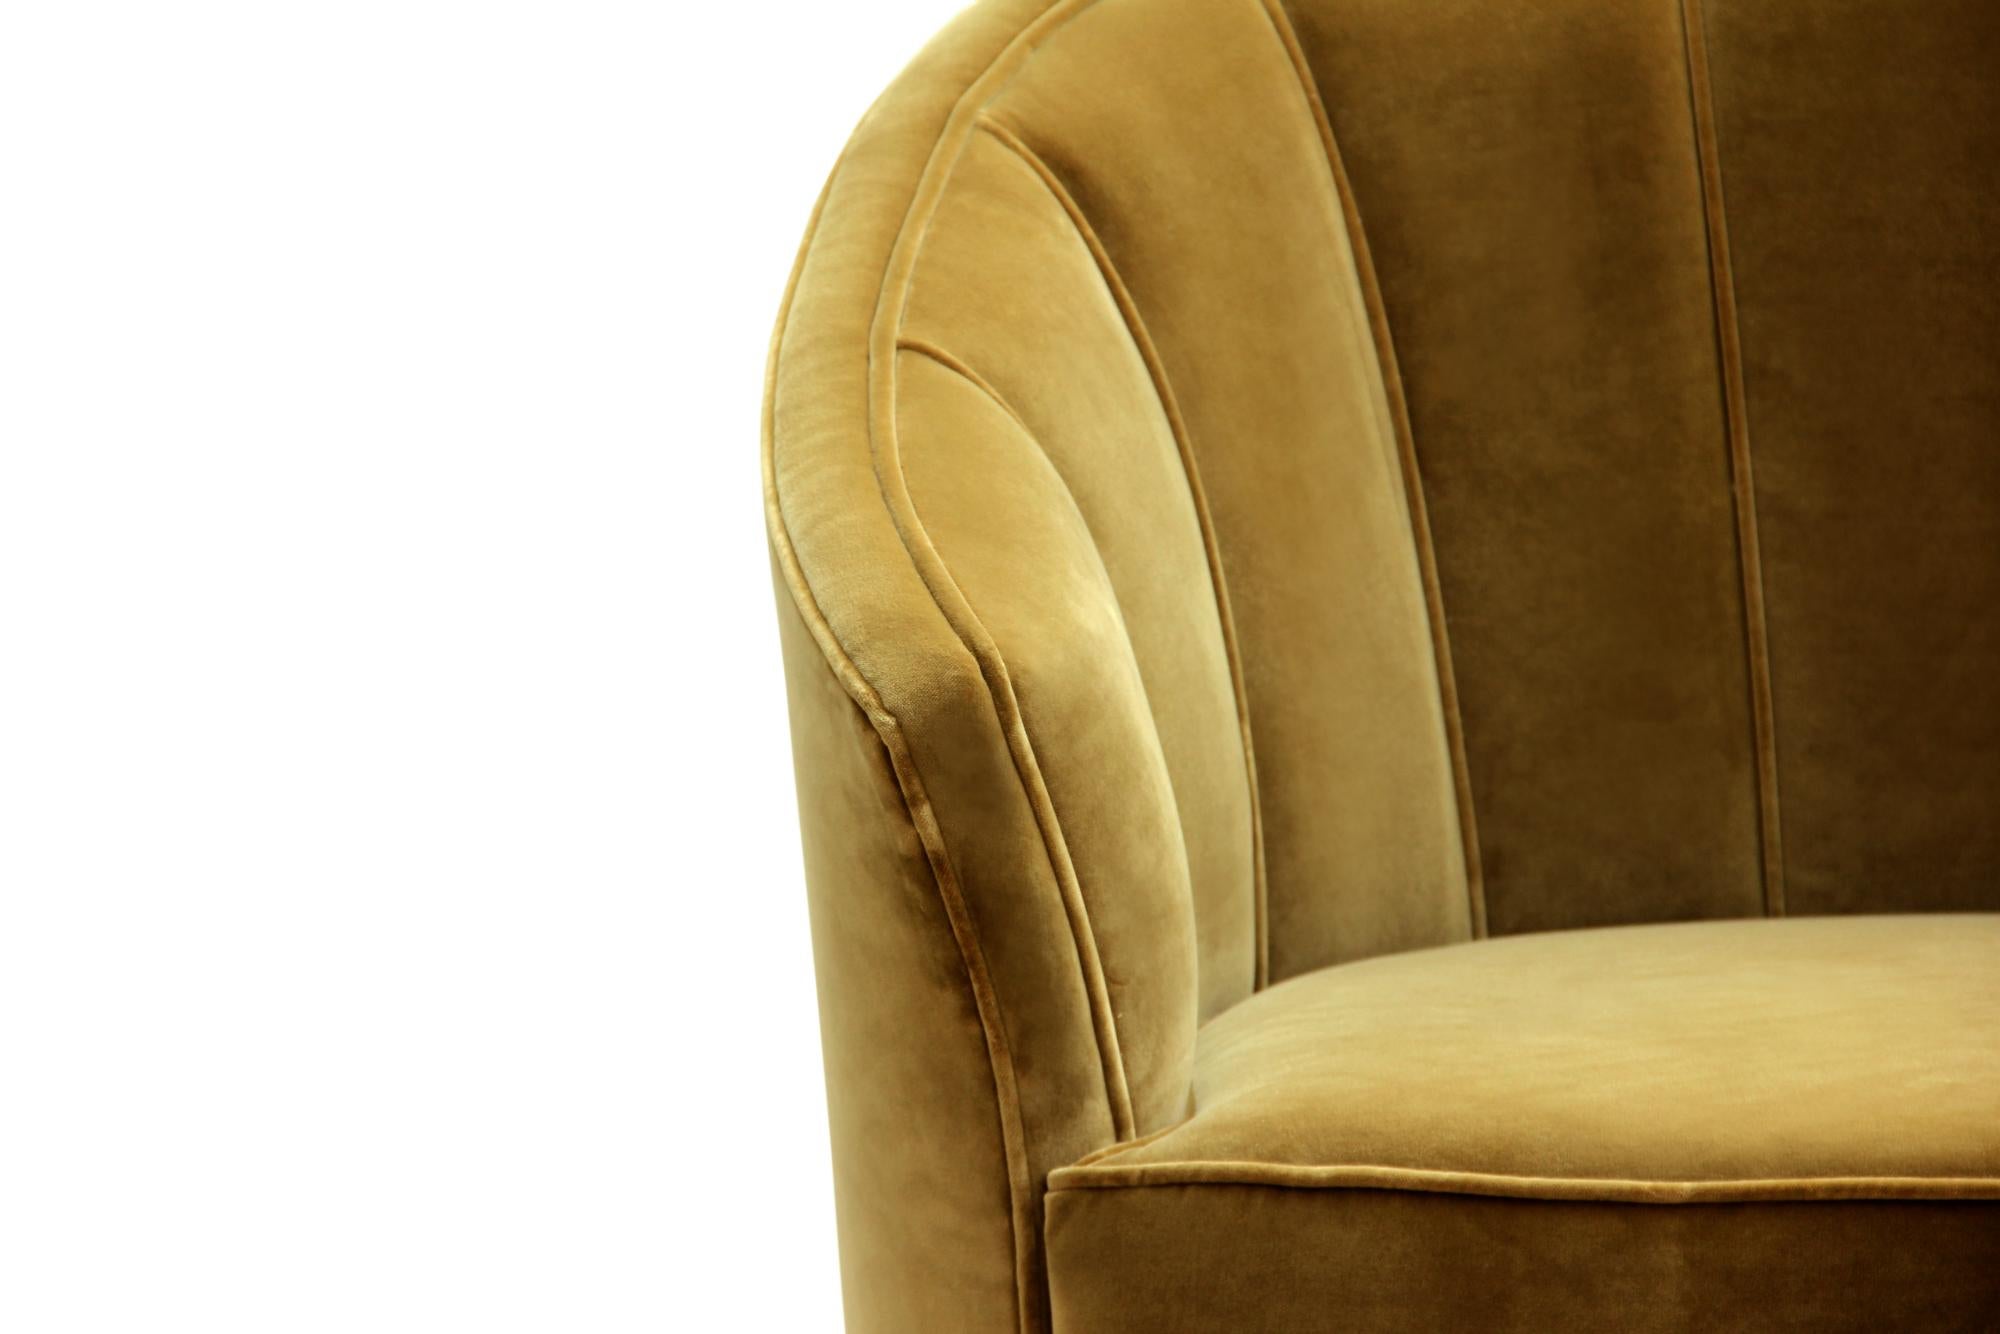 The Maya civilization had maize as one of the primary elements of their culture. Personified as a woman, Maya’s Maize God was the inspiration behind Maya upholstered chair. With legs in matte aged brass, this velvet accent chair has the sensual and